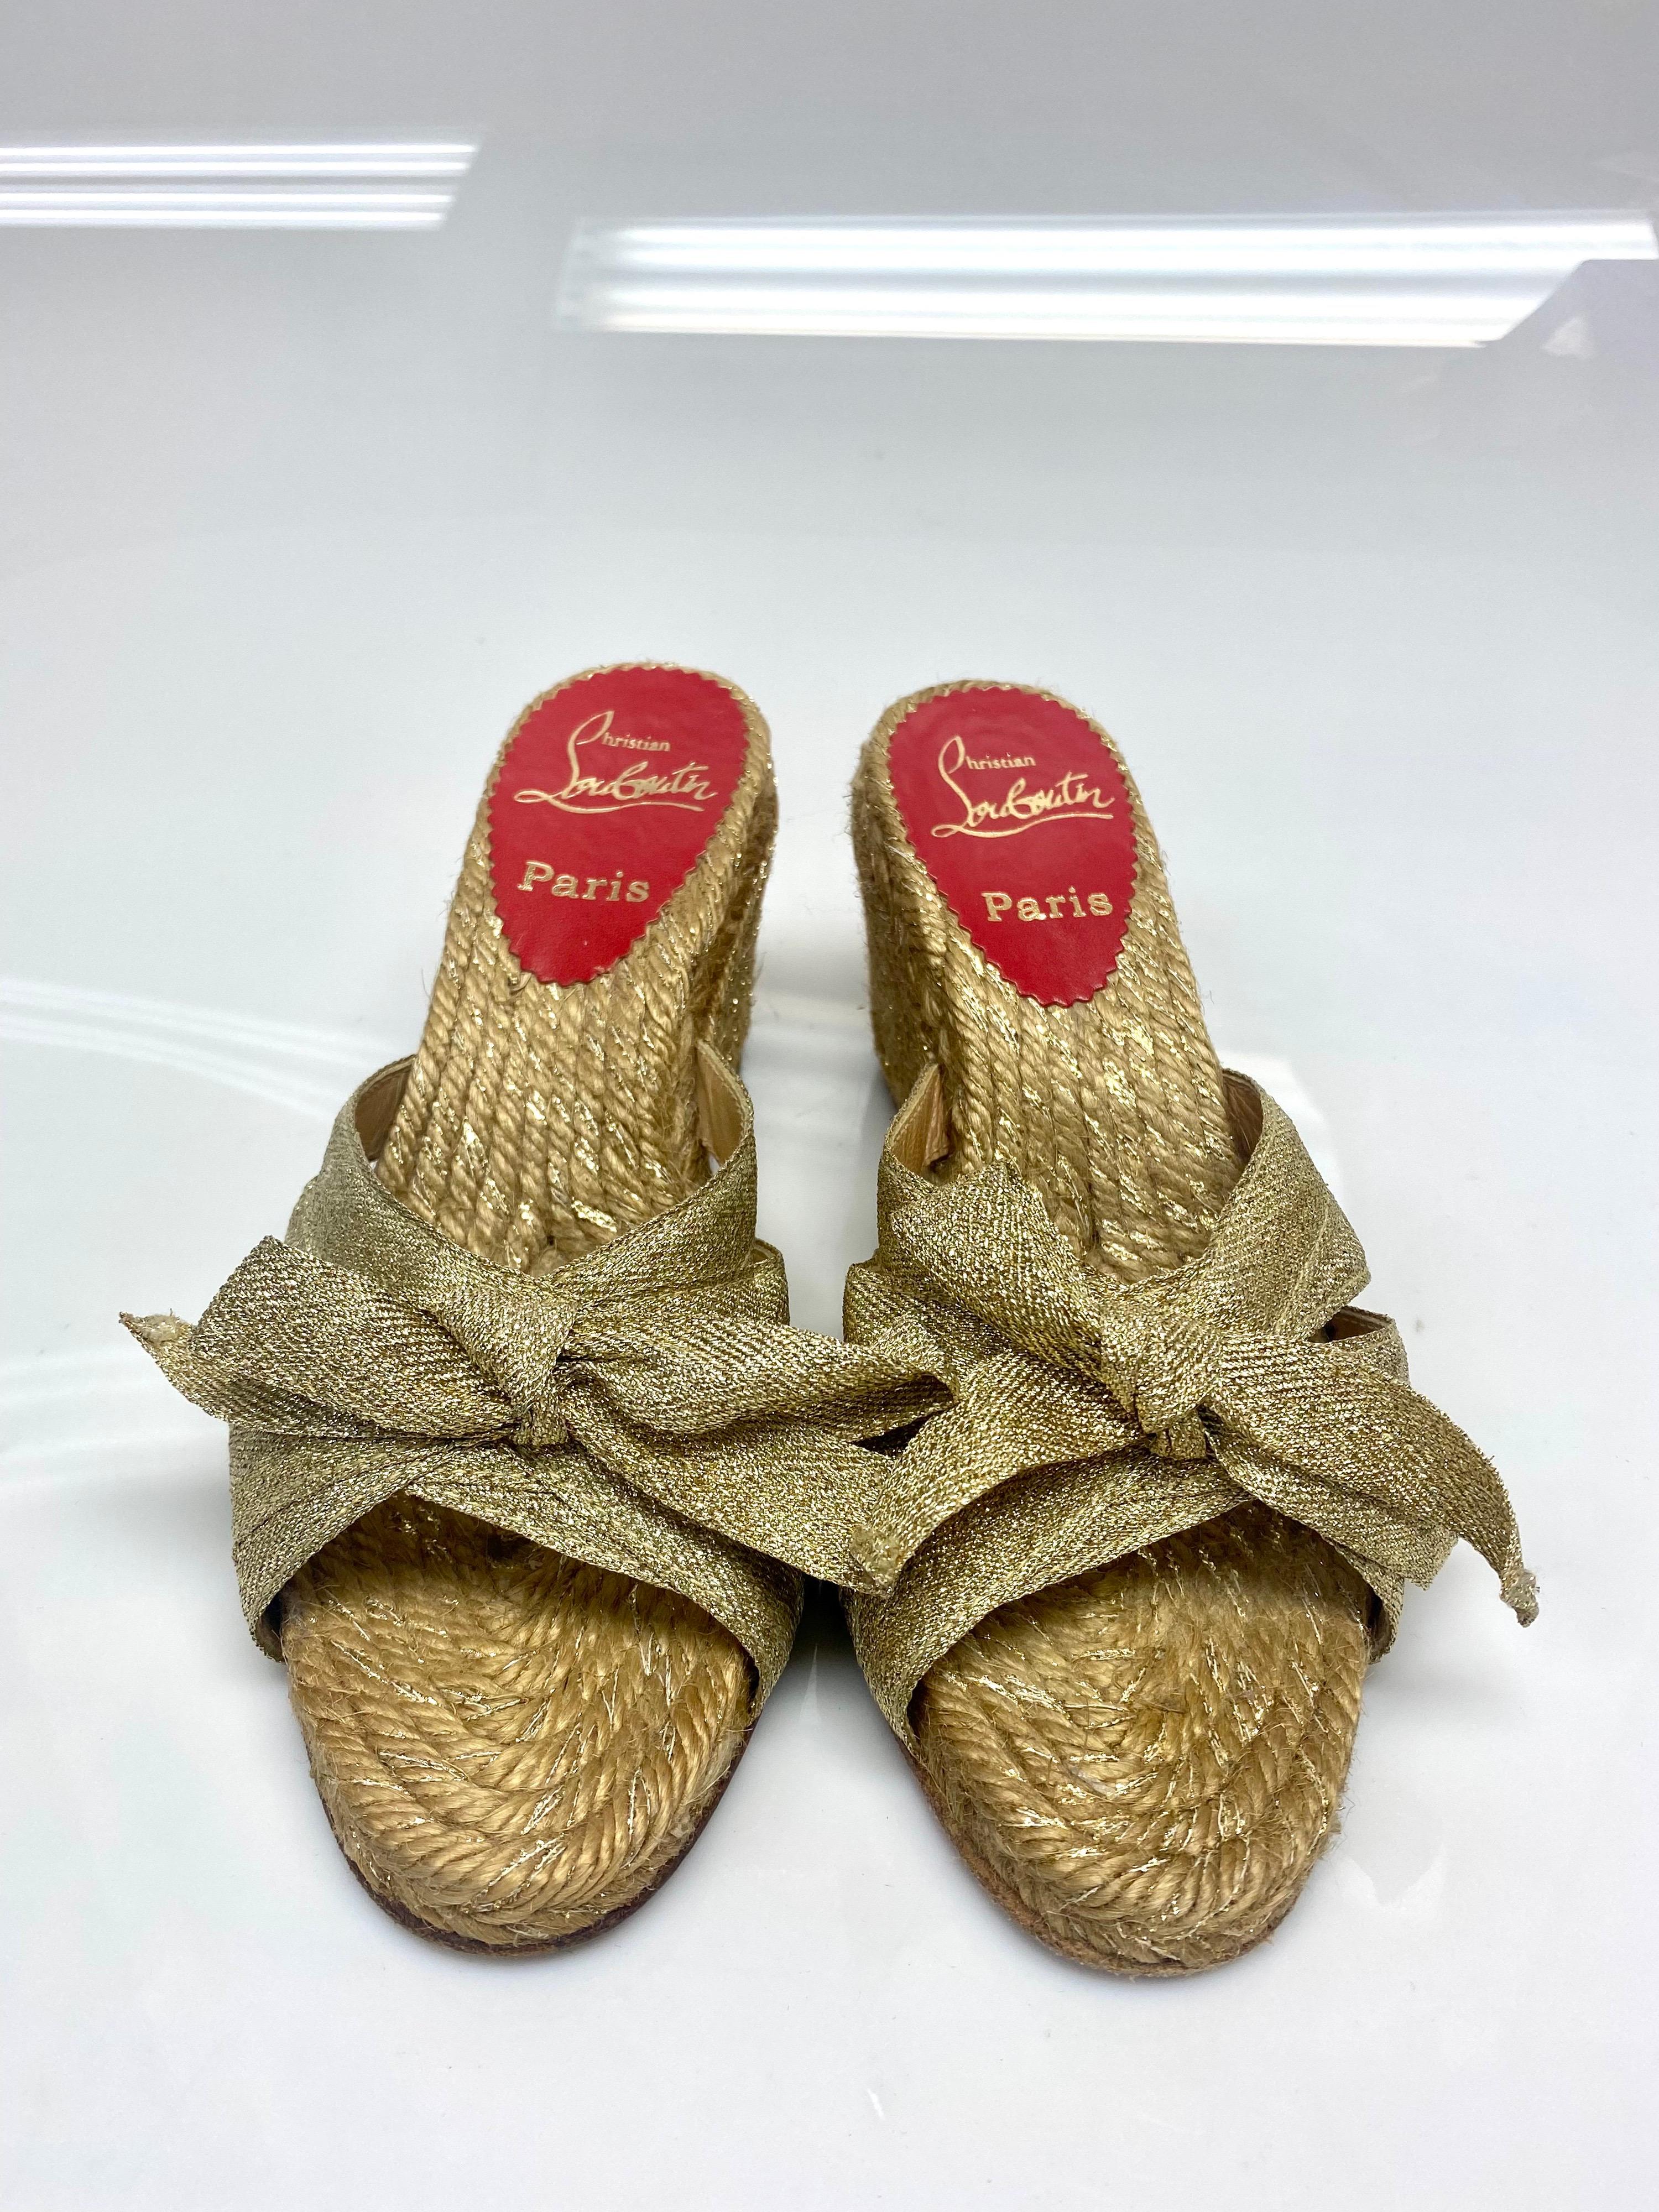 christian louboutin wedges gold